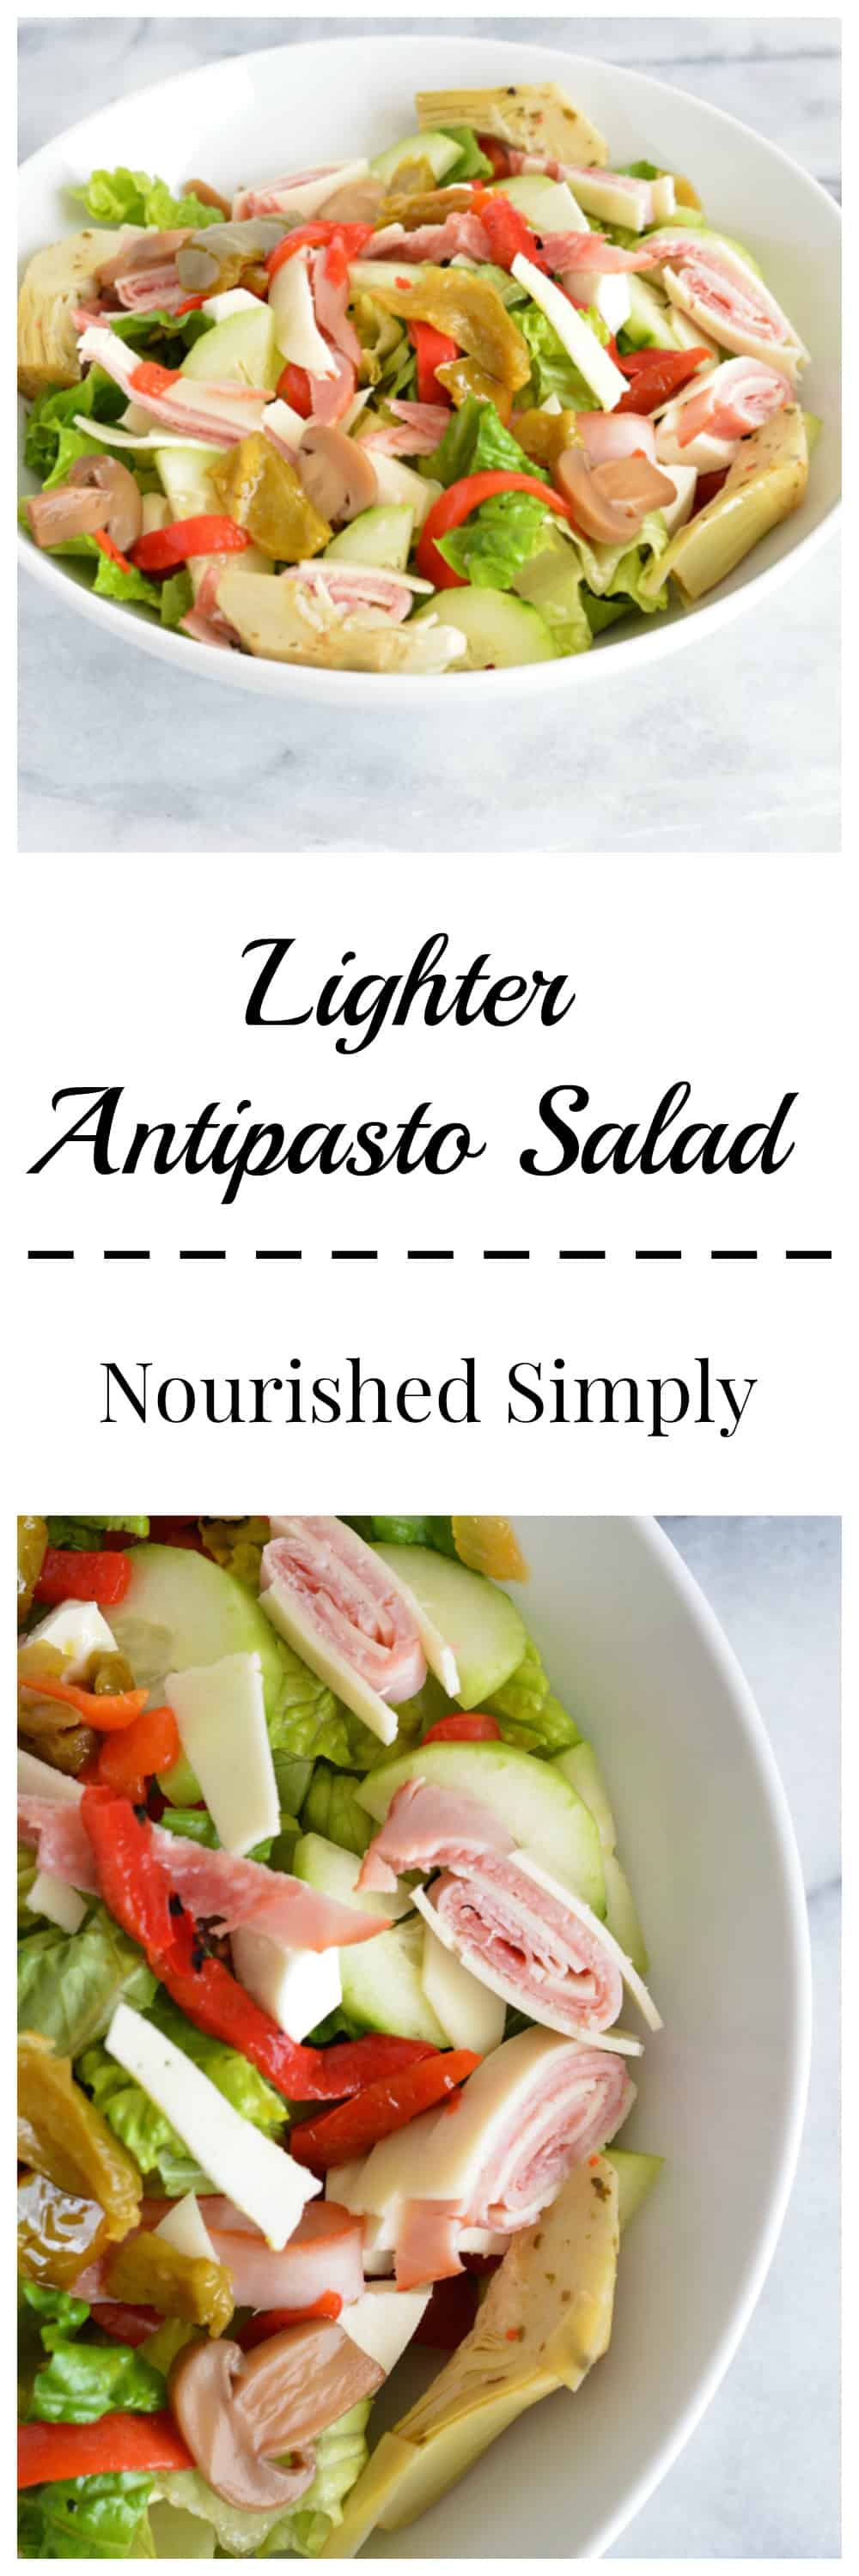 A lower calorie version of antipasto salad with the same great flavors.